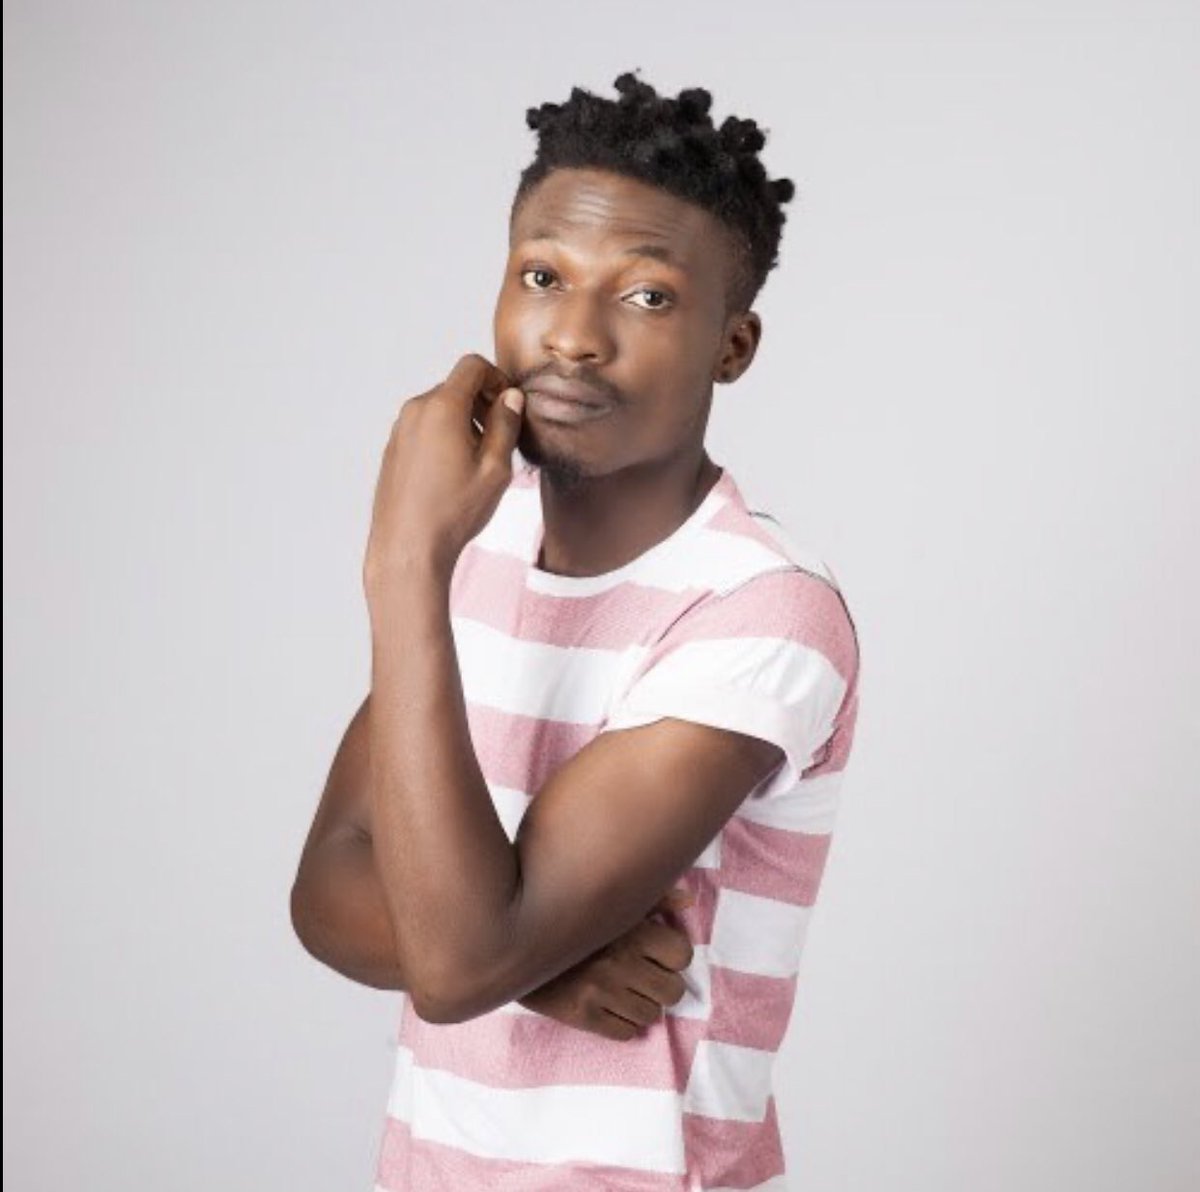 Season 2 (2017) – Michael Efe EjebaOver a decade after the first season of Big Brother Nigeria held the show returned entitled Big Brother Naija. It was themed “See Gobe” and premiered in January 2017 and saw 22 contestants vying for the N25 million grand prize. Ex-housemate